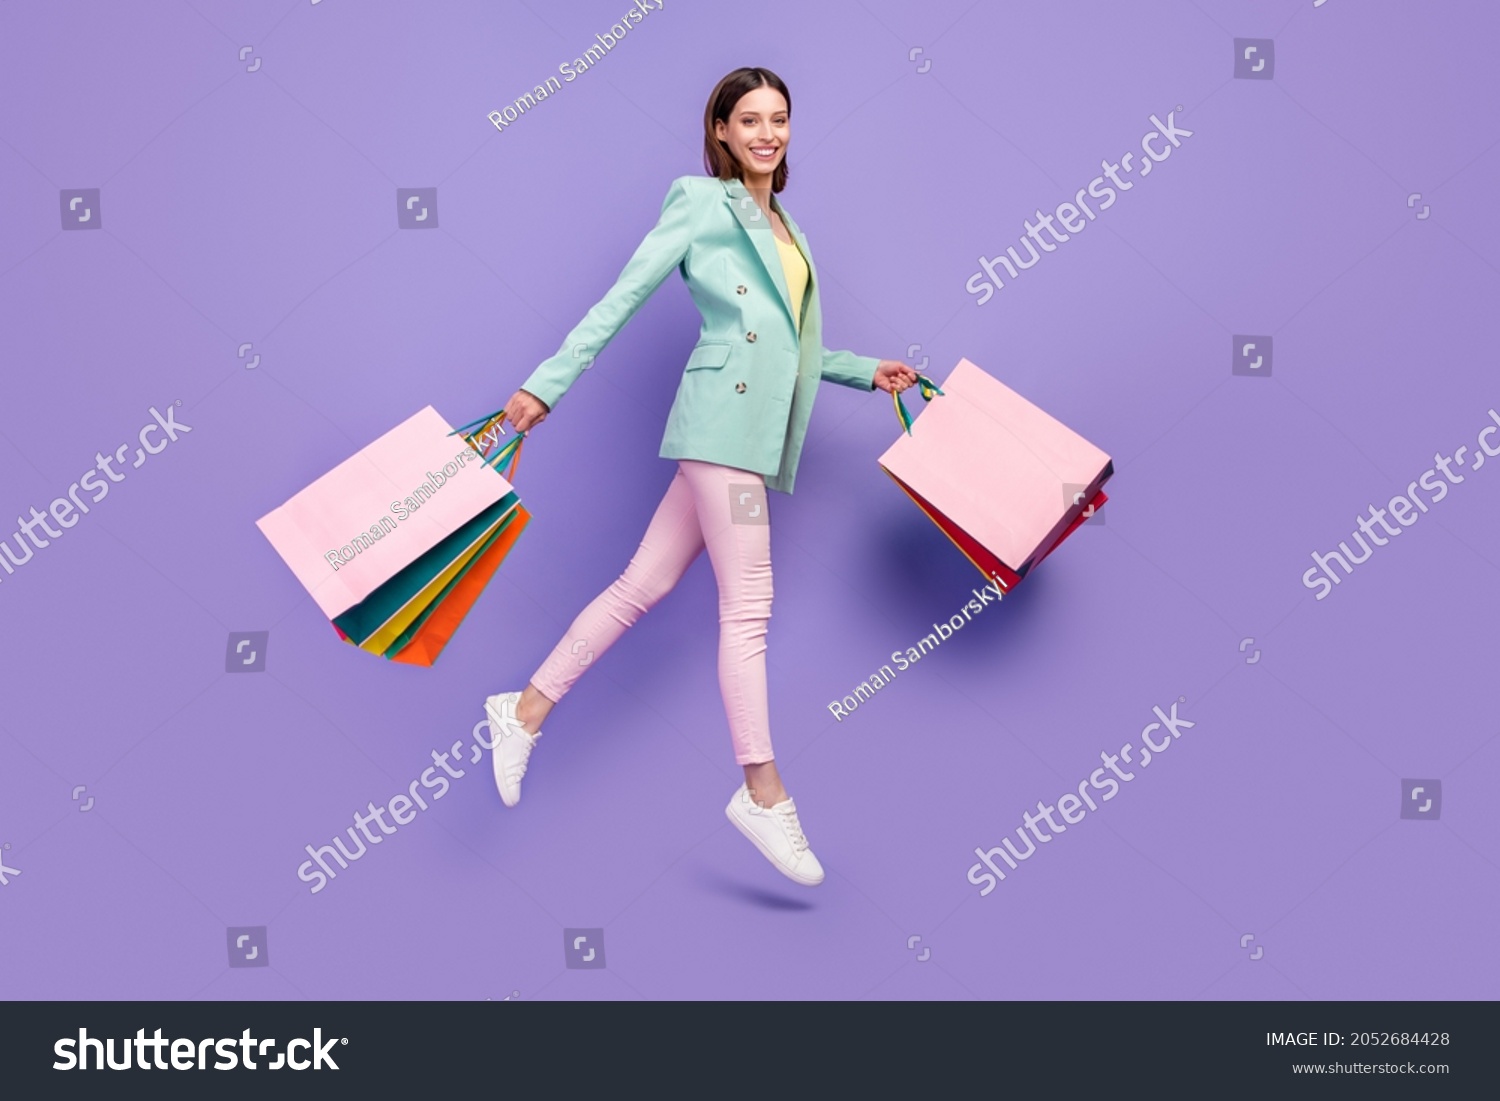 274,540 Woman holding shopping bags Images, Stock Photos & Vectors ...